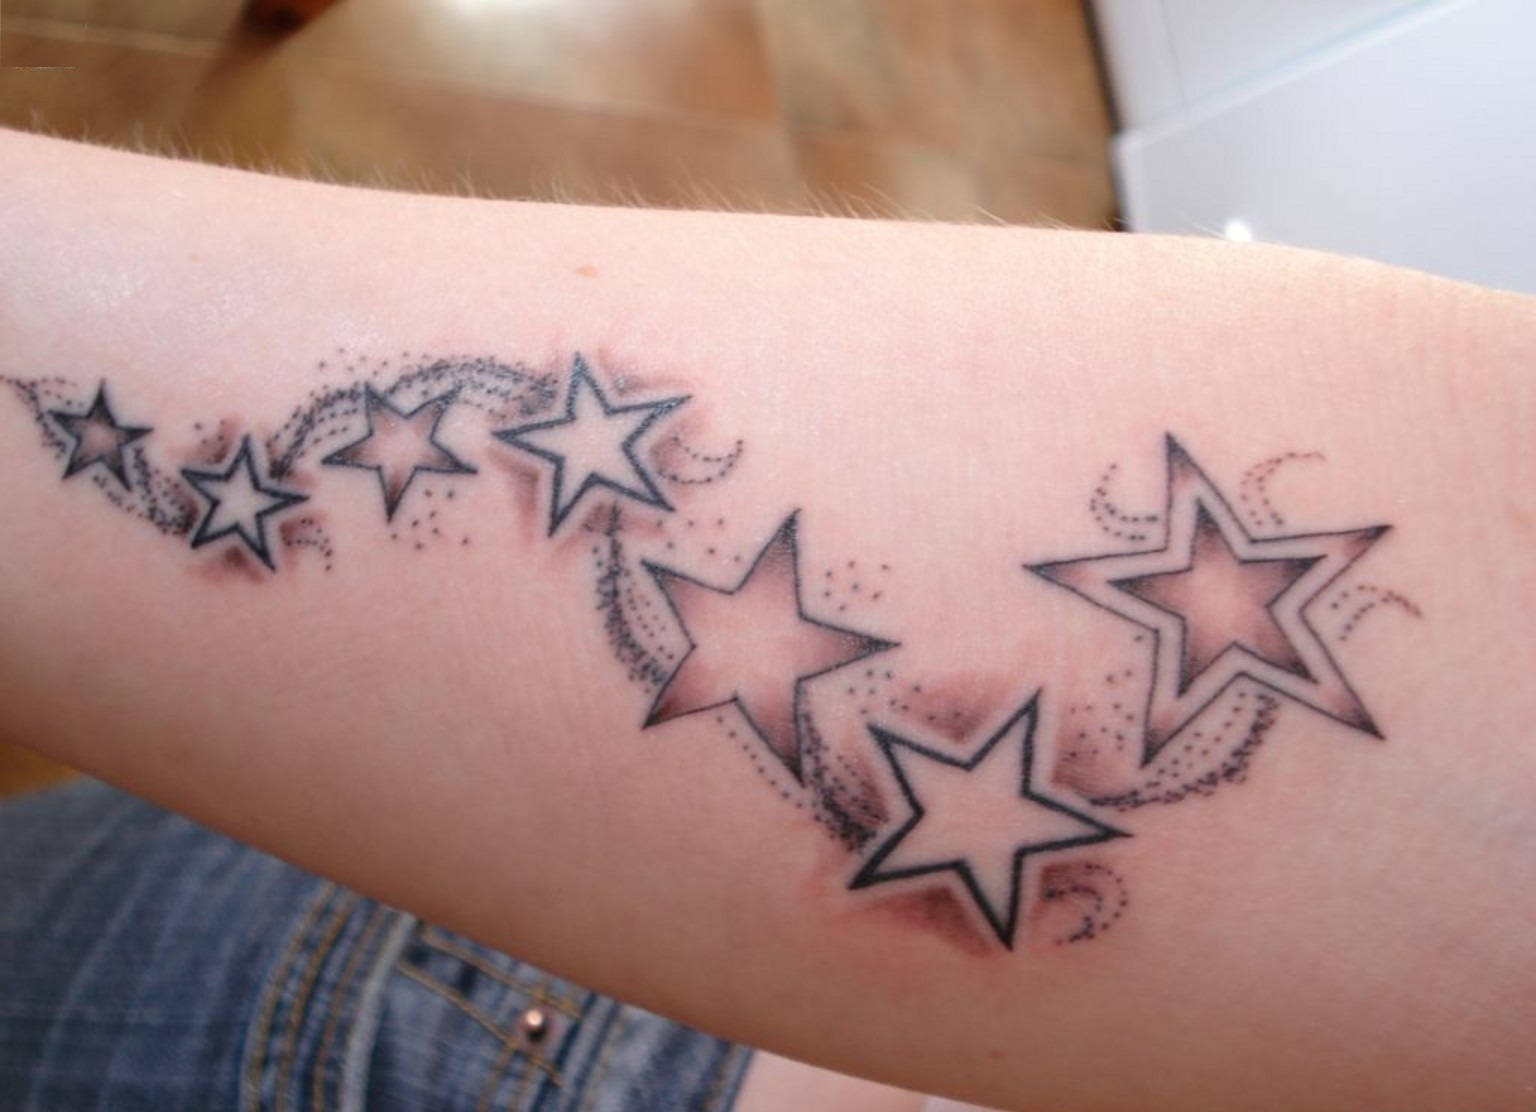 Star Tattoo Designs for Arms - wide 10